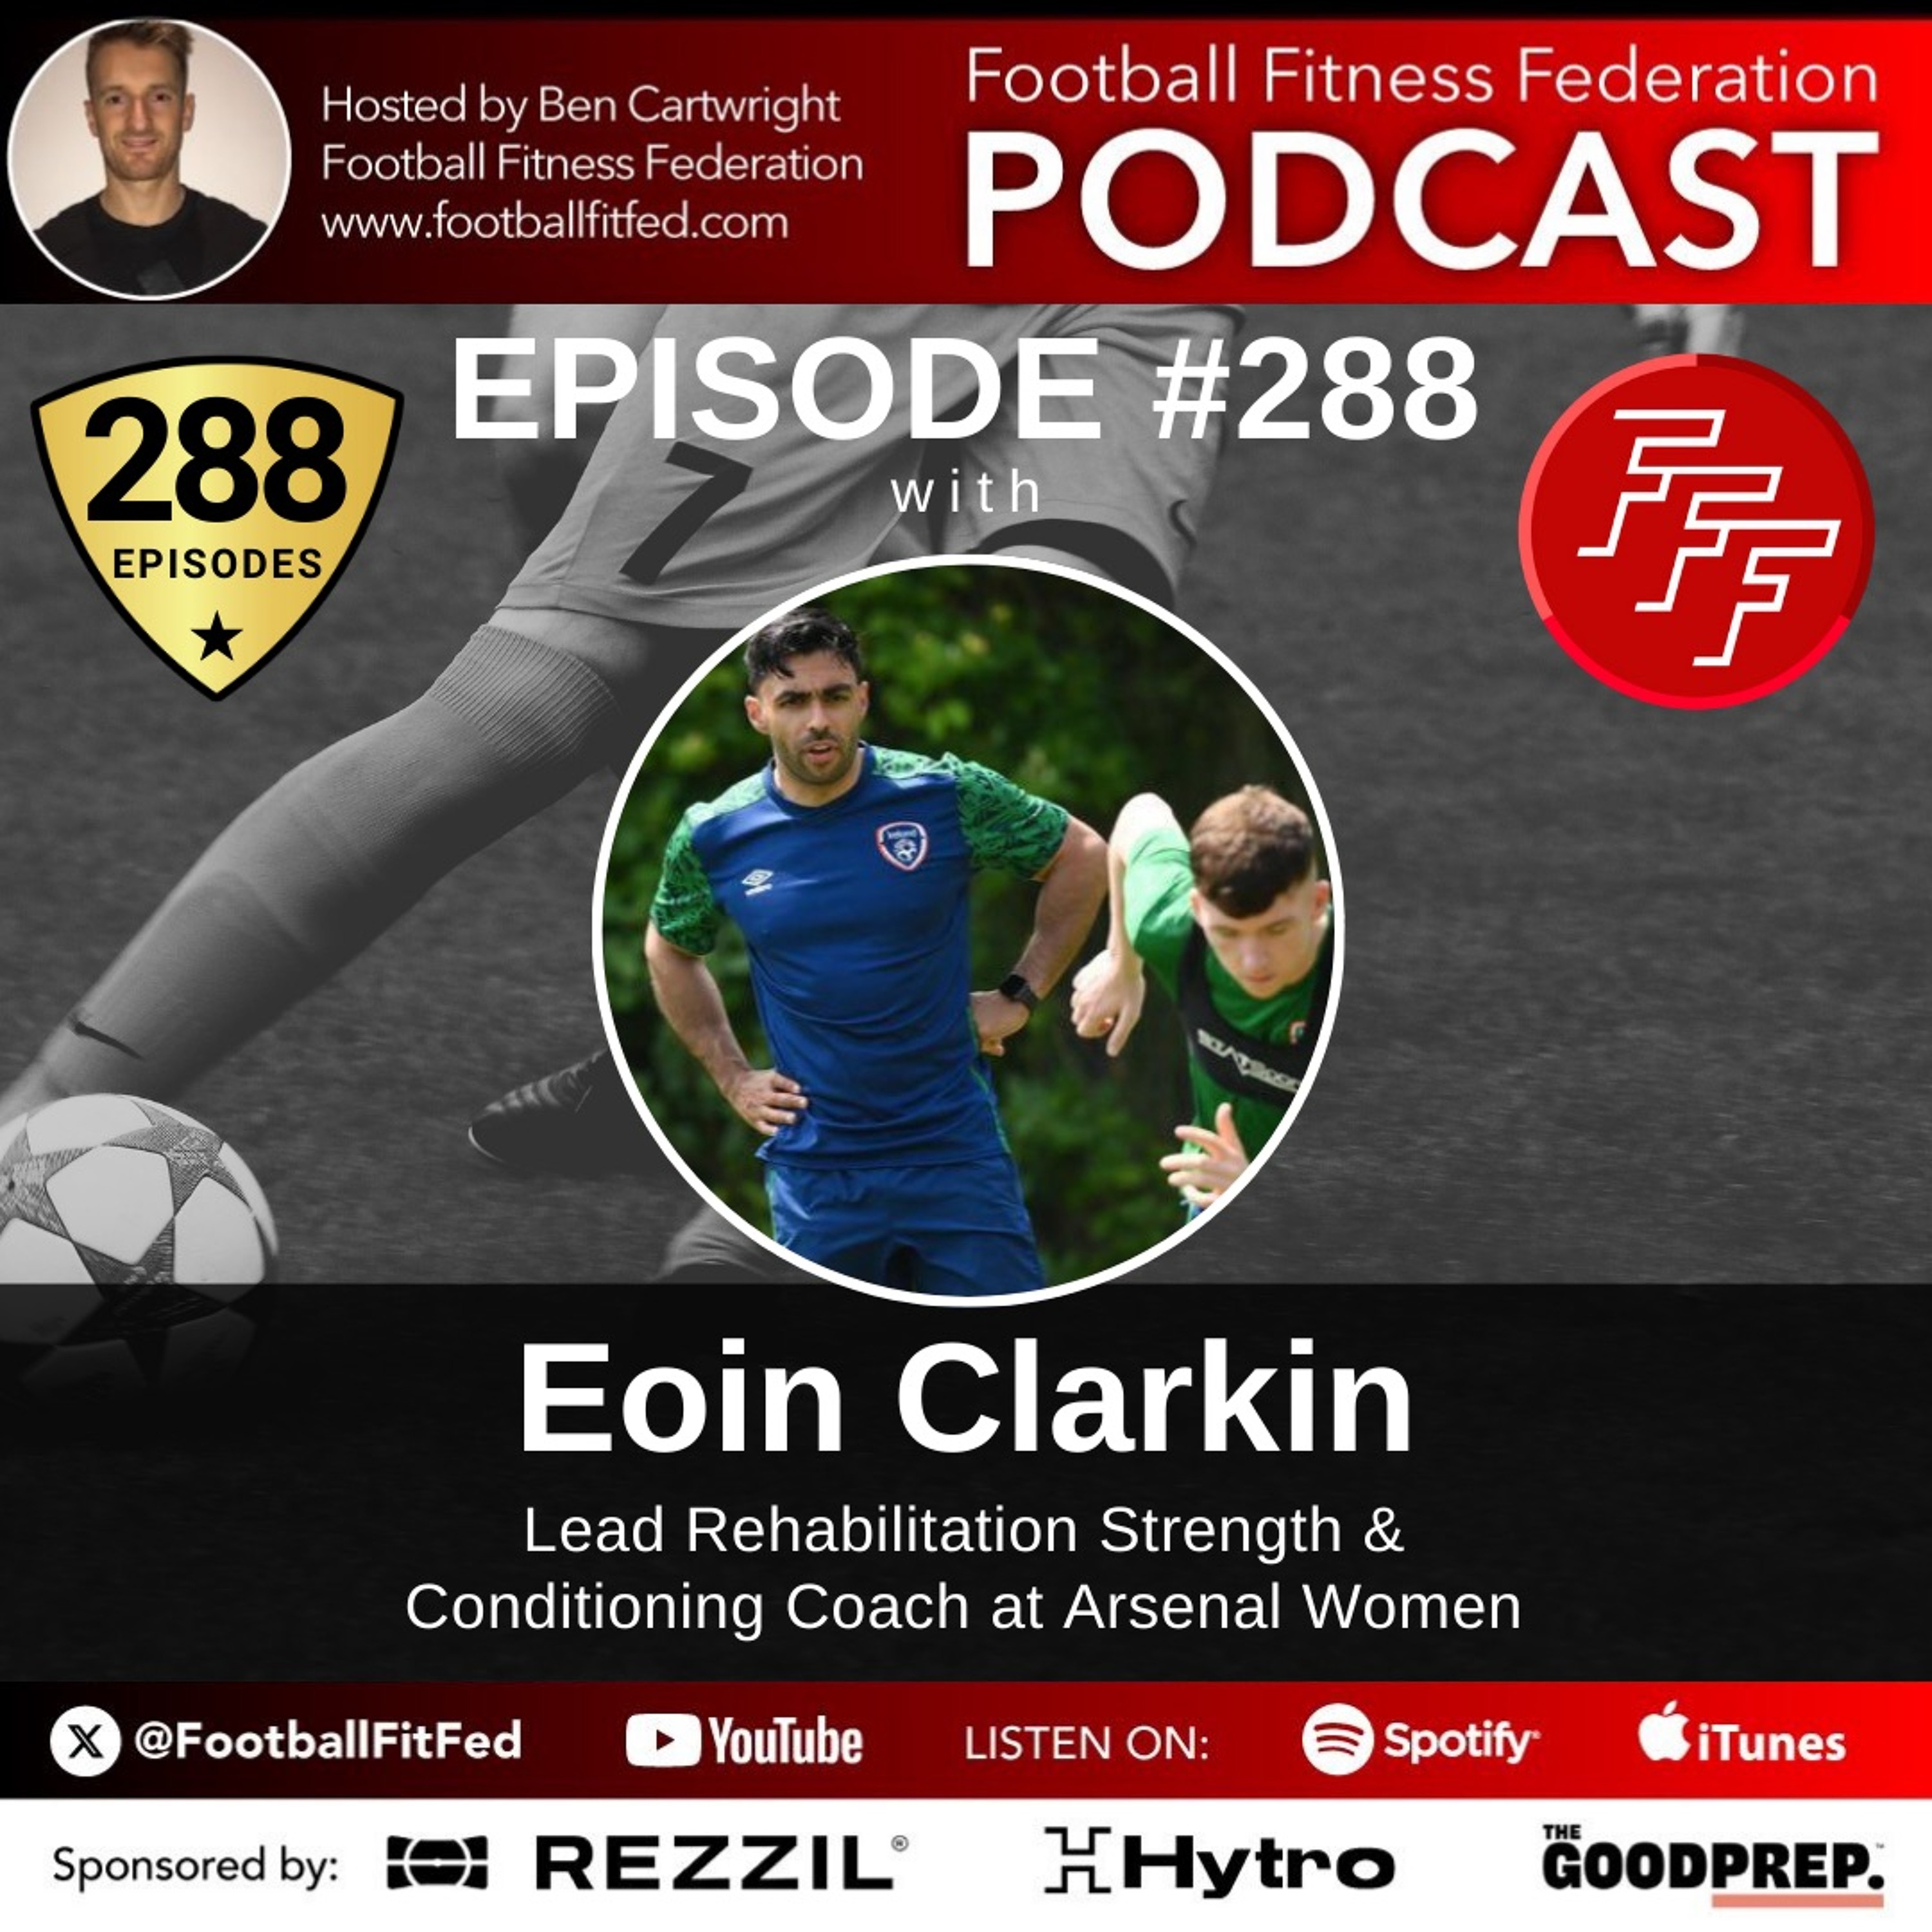 #288 "Shaping The Rehab Process" With Eoin Clarkin